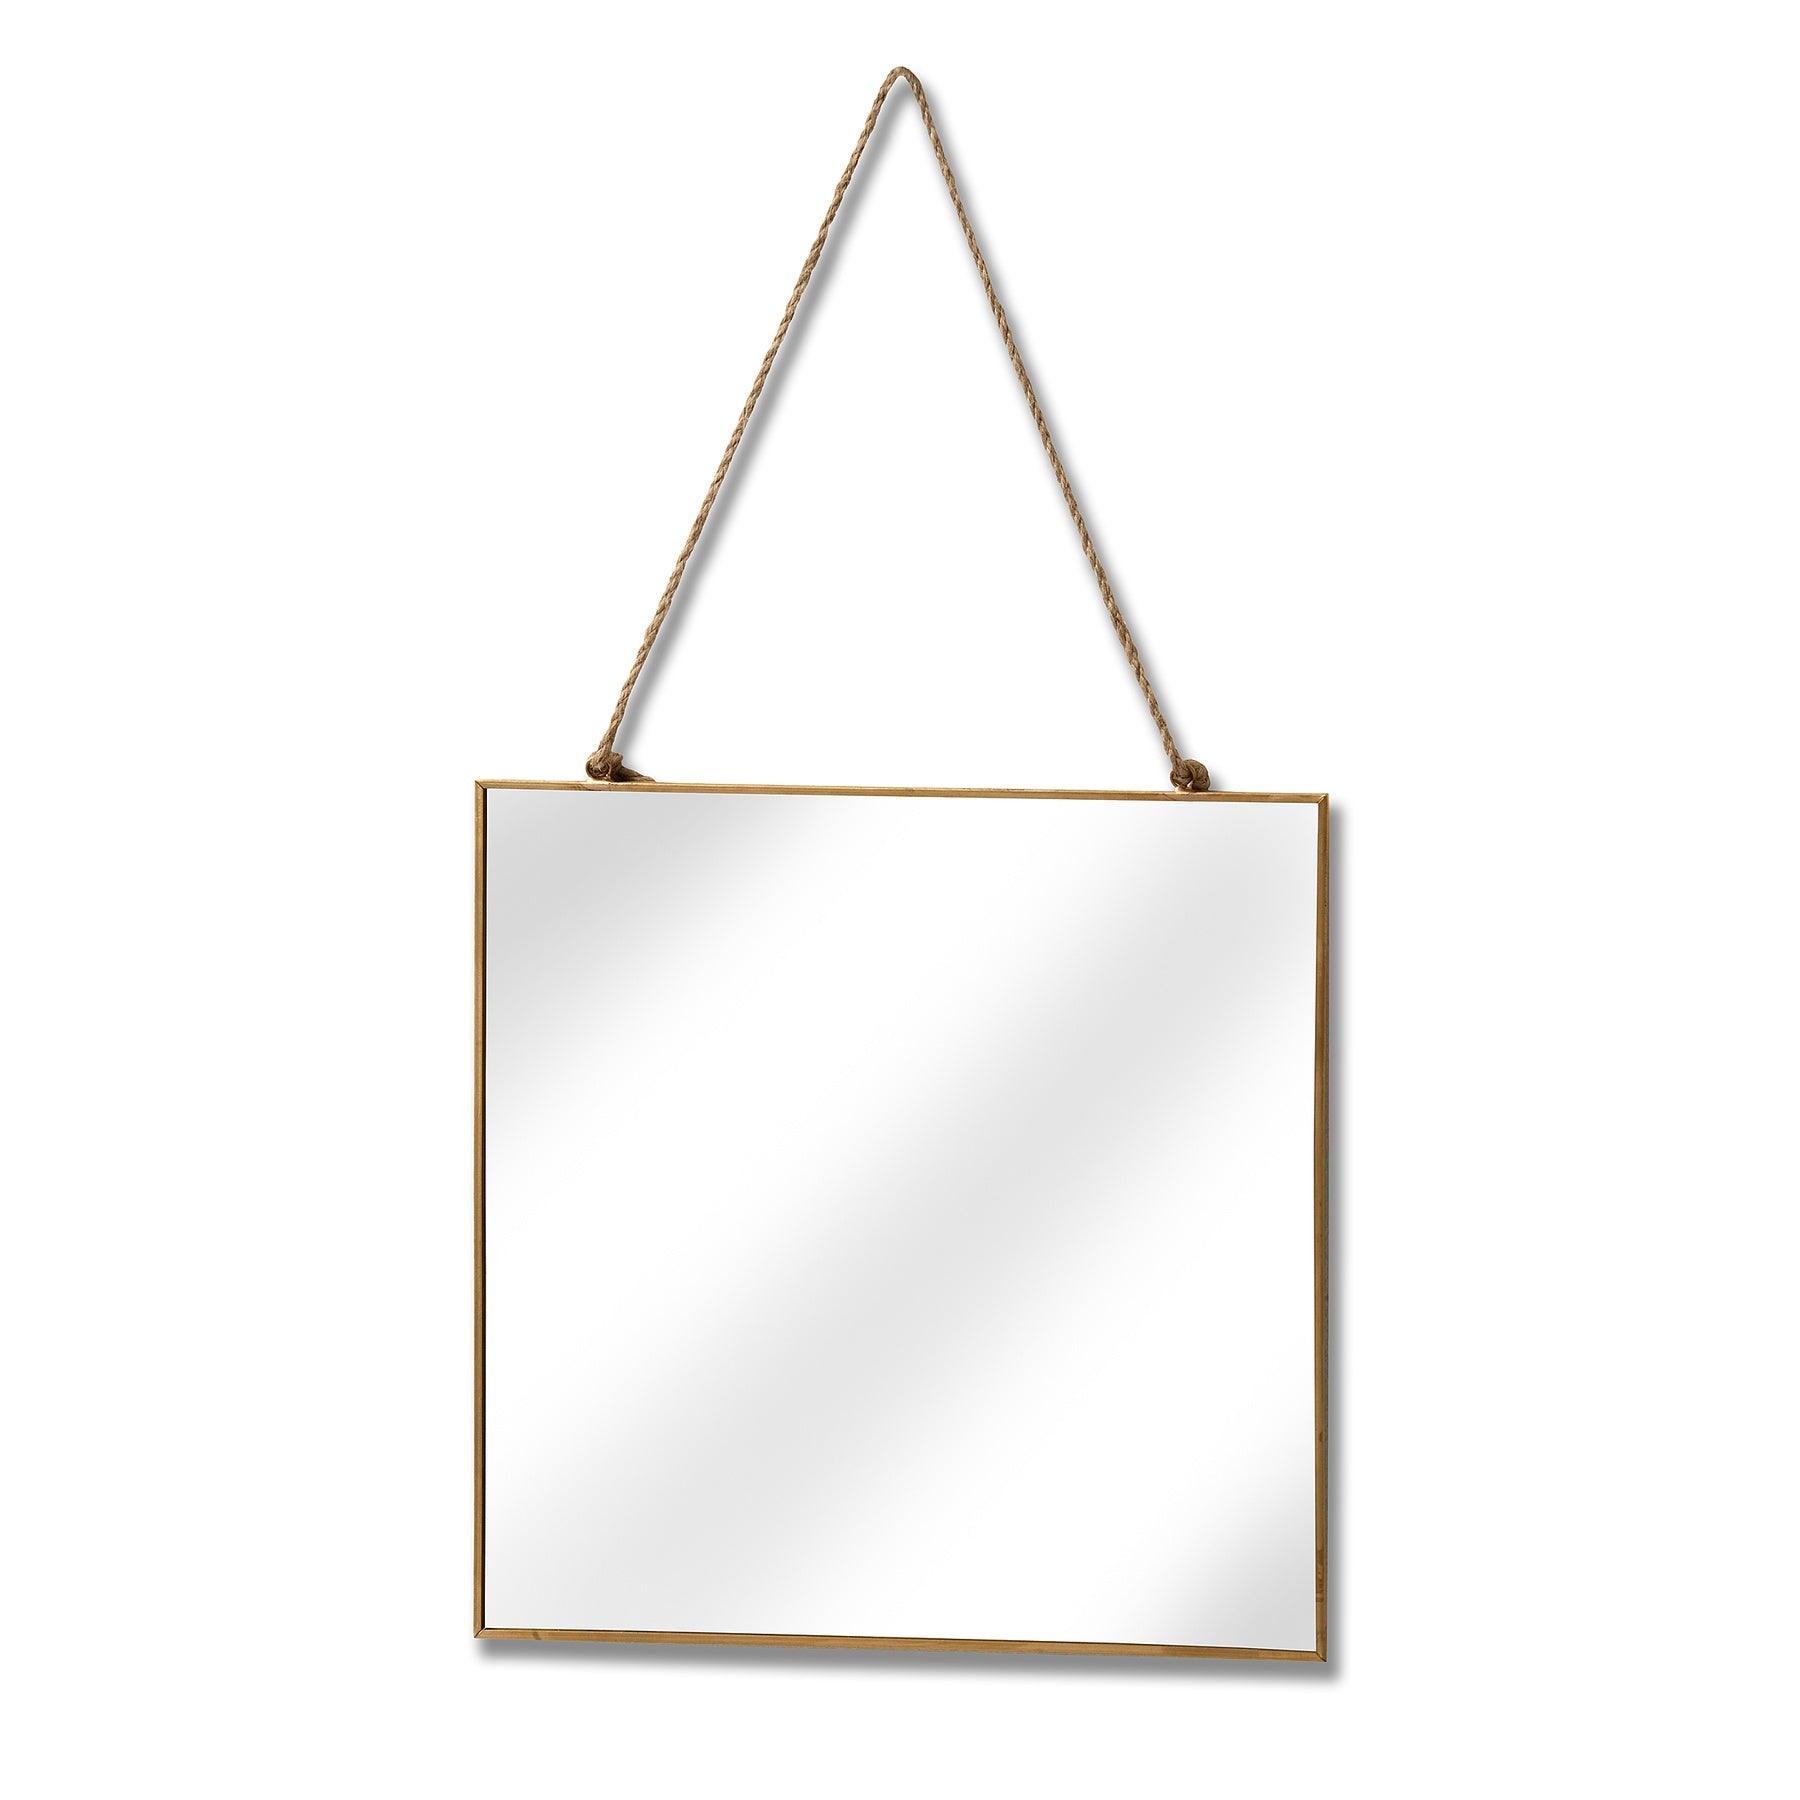 View Gold Edged Square Hanging Wall Mirror information